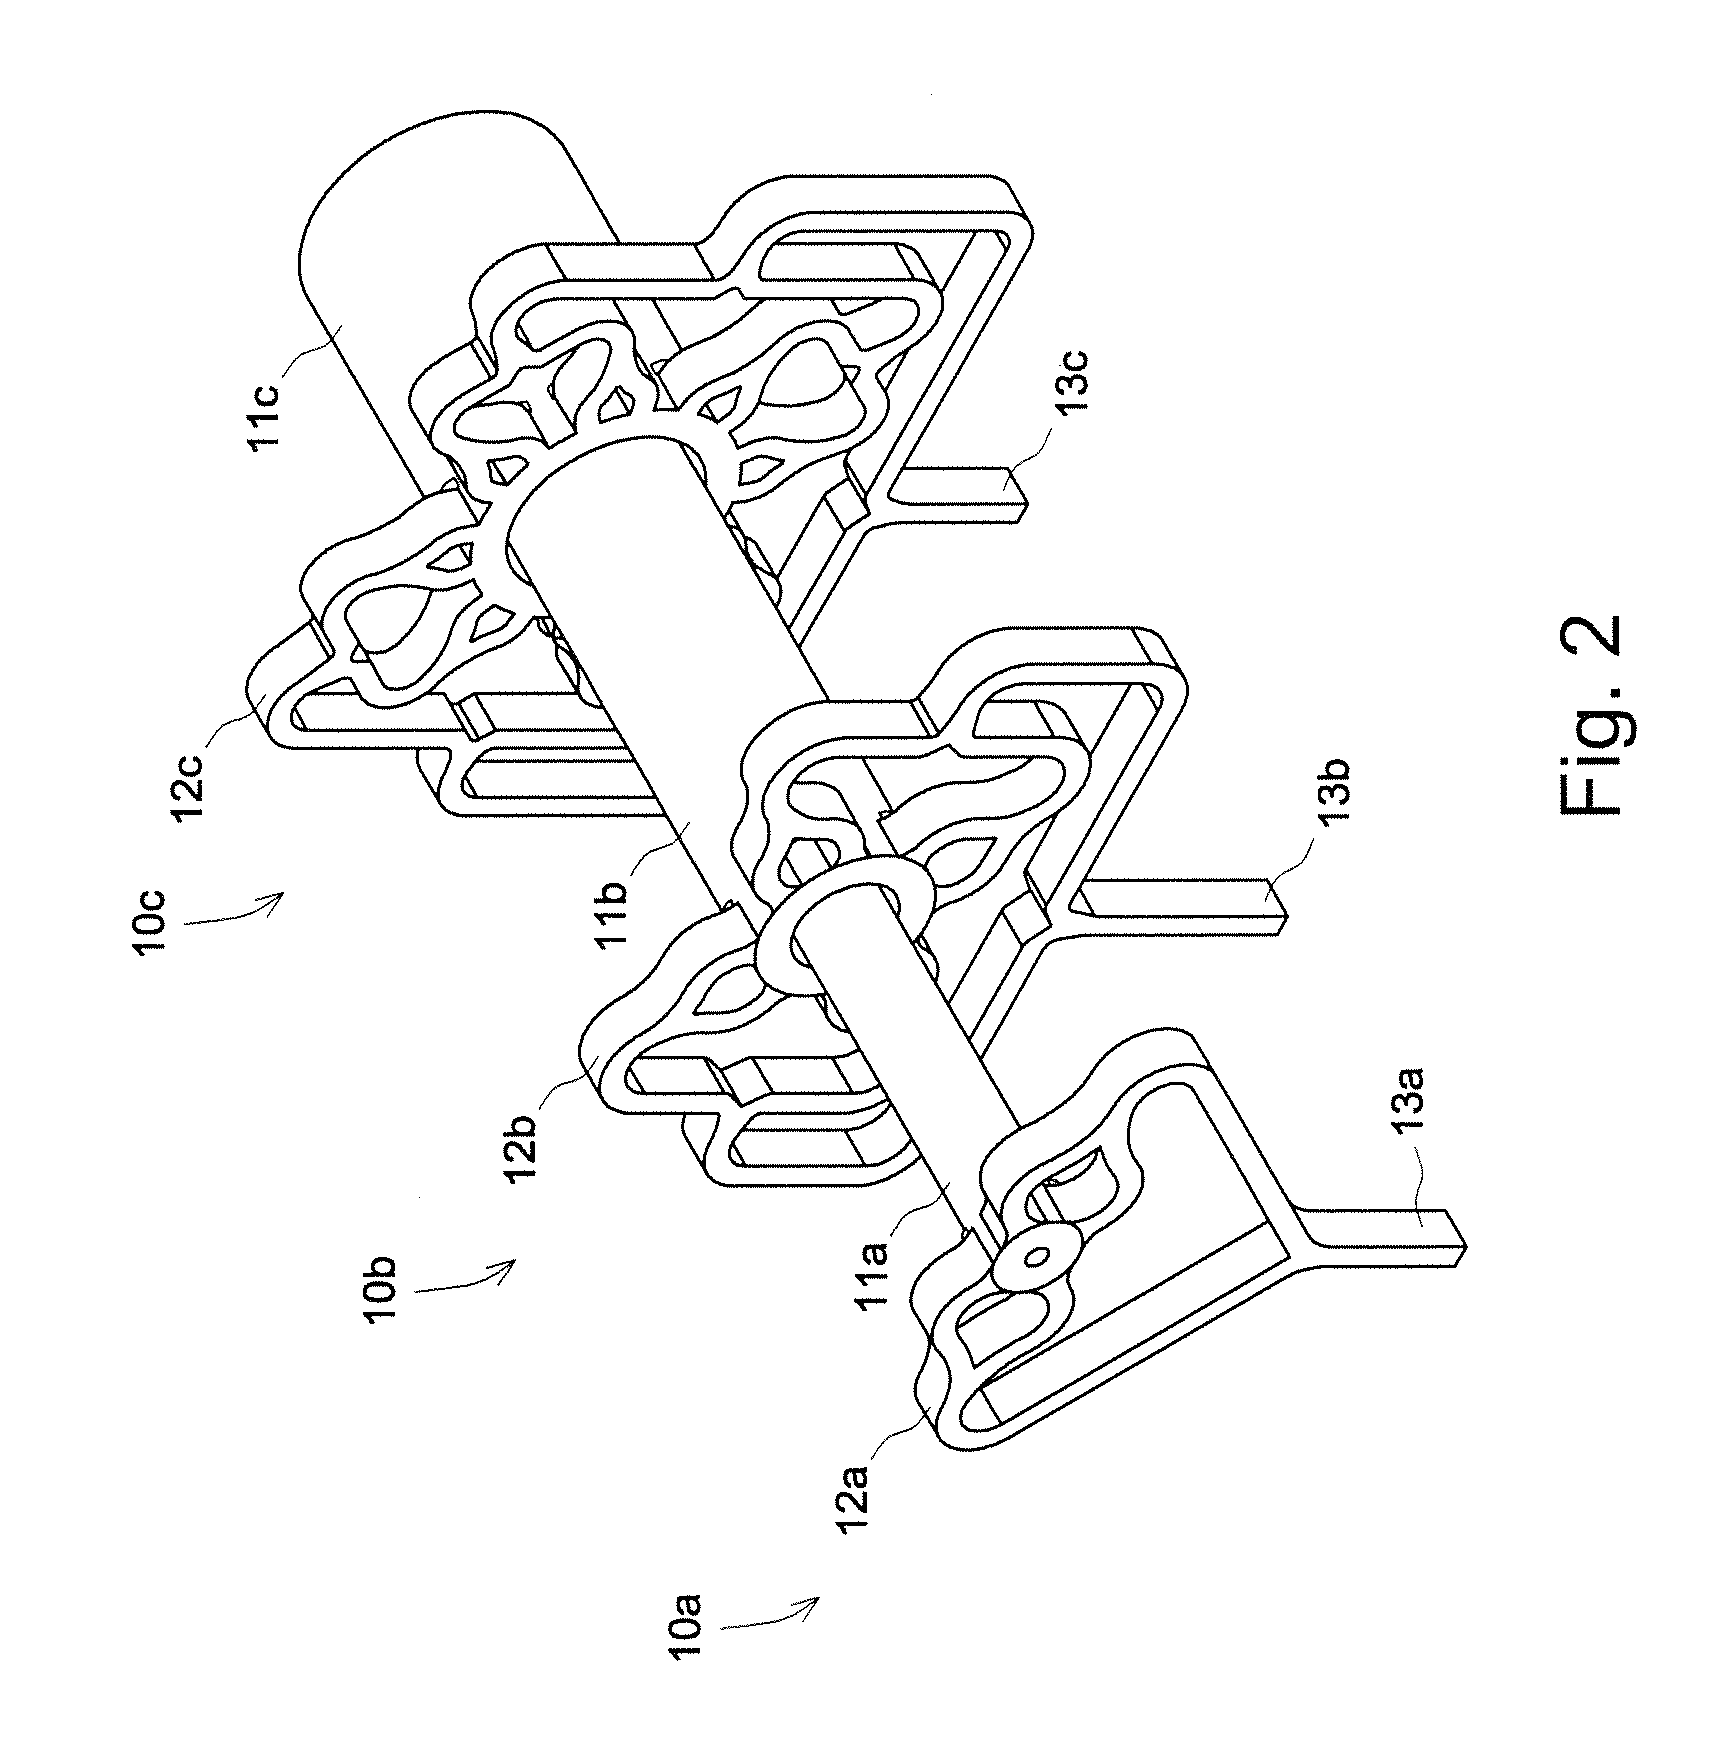 Multi-channel mode converter and rotary joint operating with a series of TE or TM mode electromagnetic wave